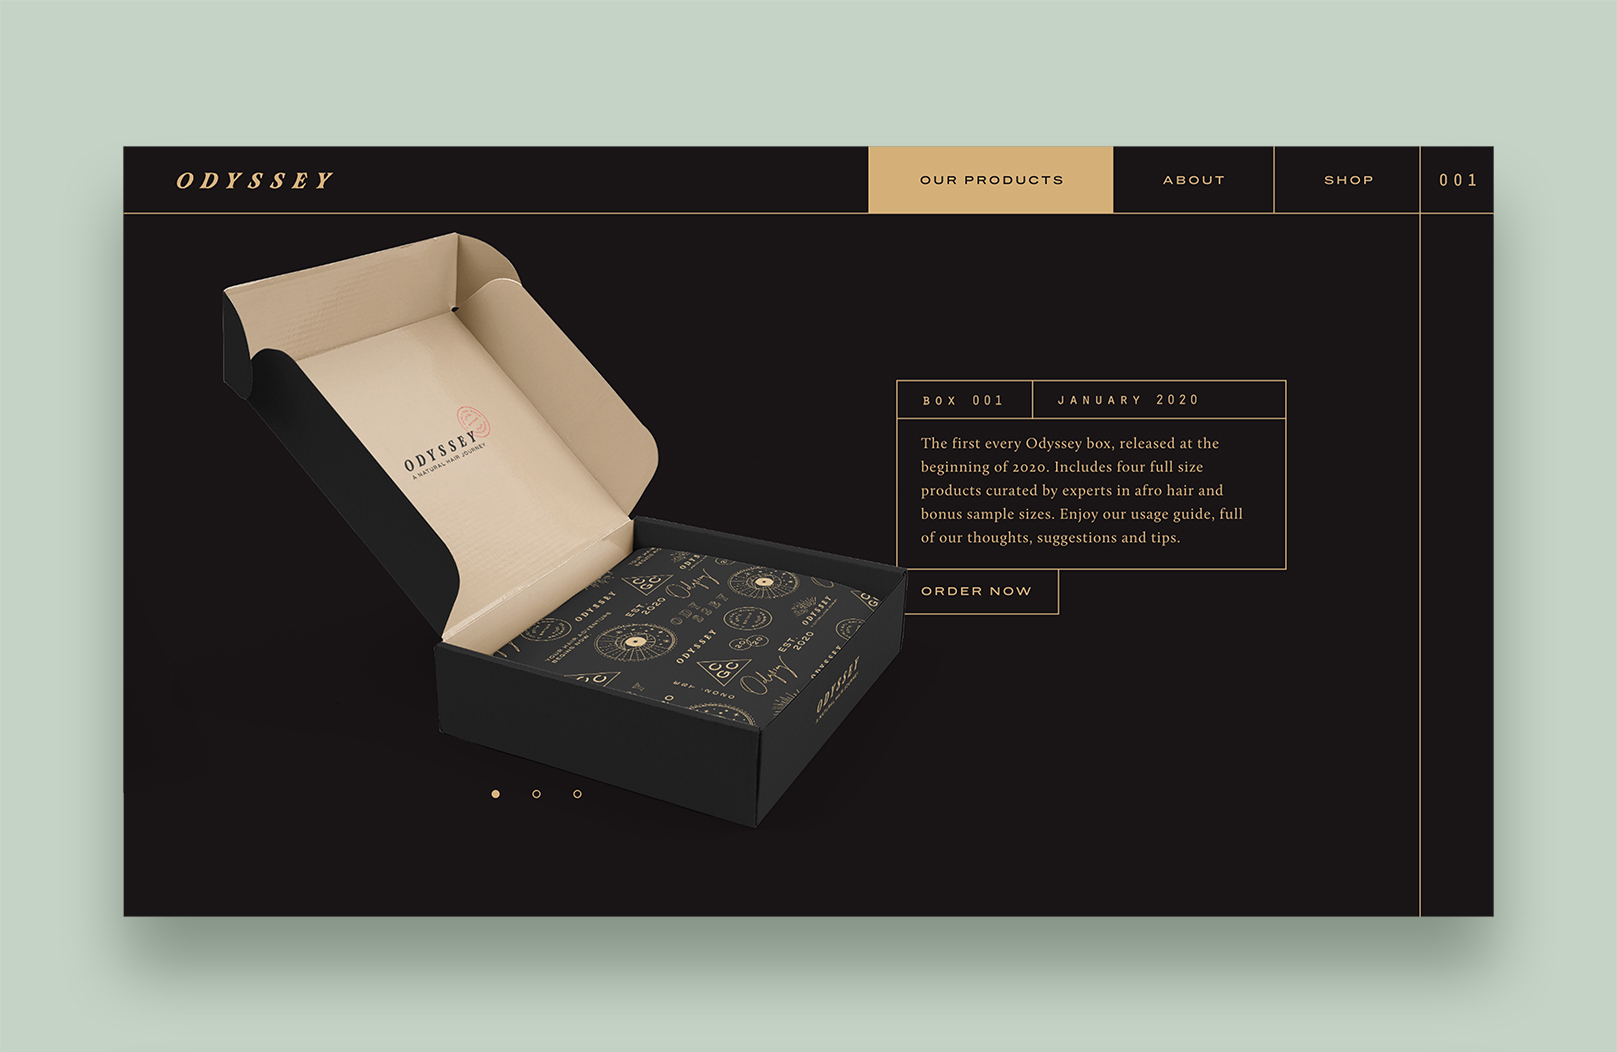 the odyssey website product page featuring an open box